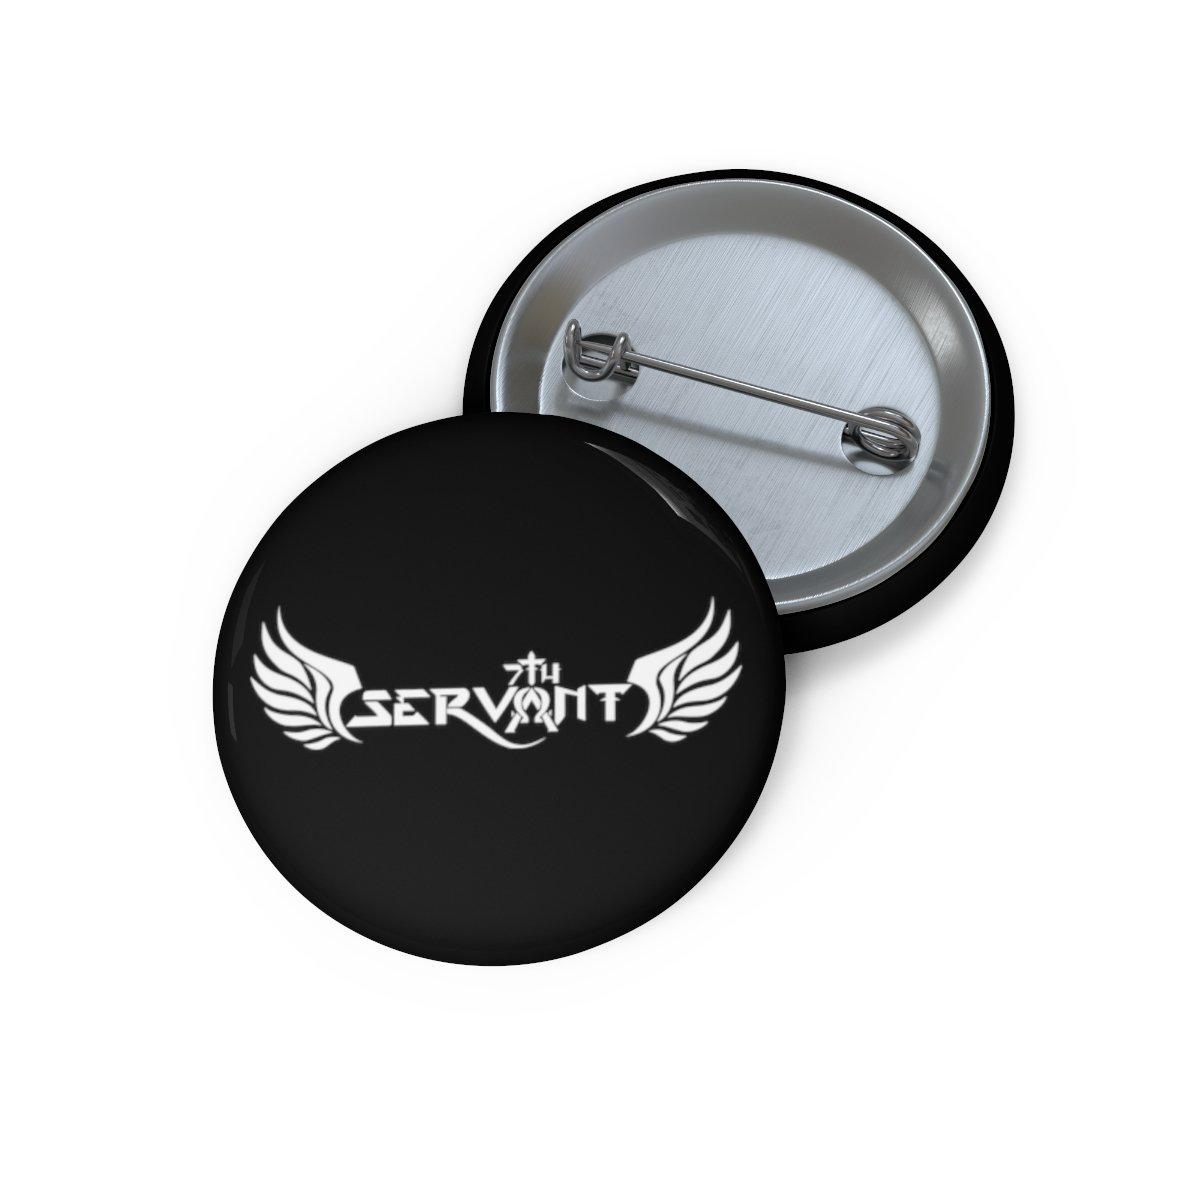 Seventh Servant Winged Logo Pin Buttons